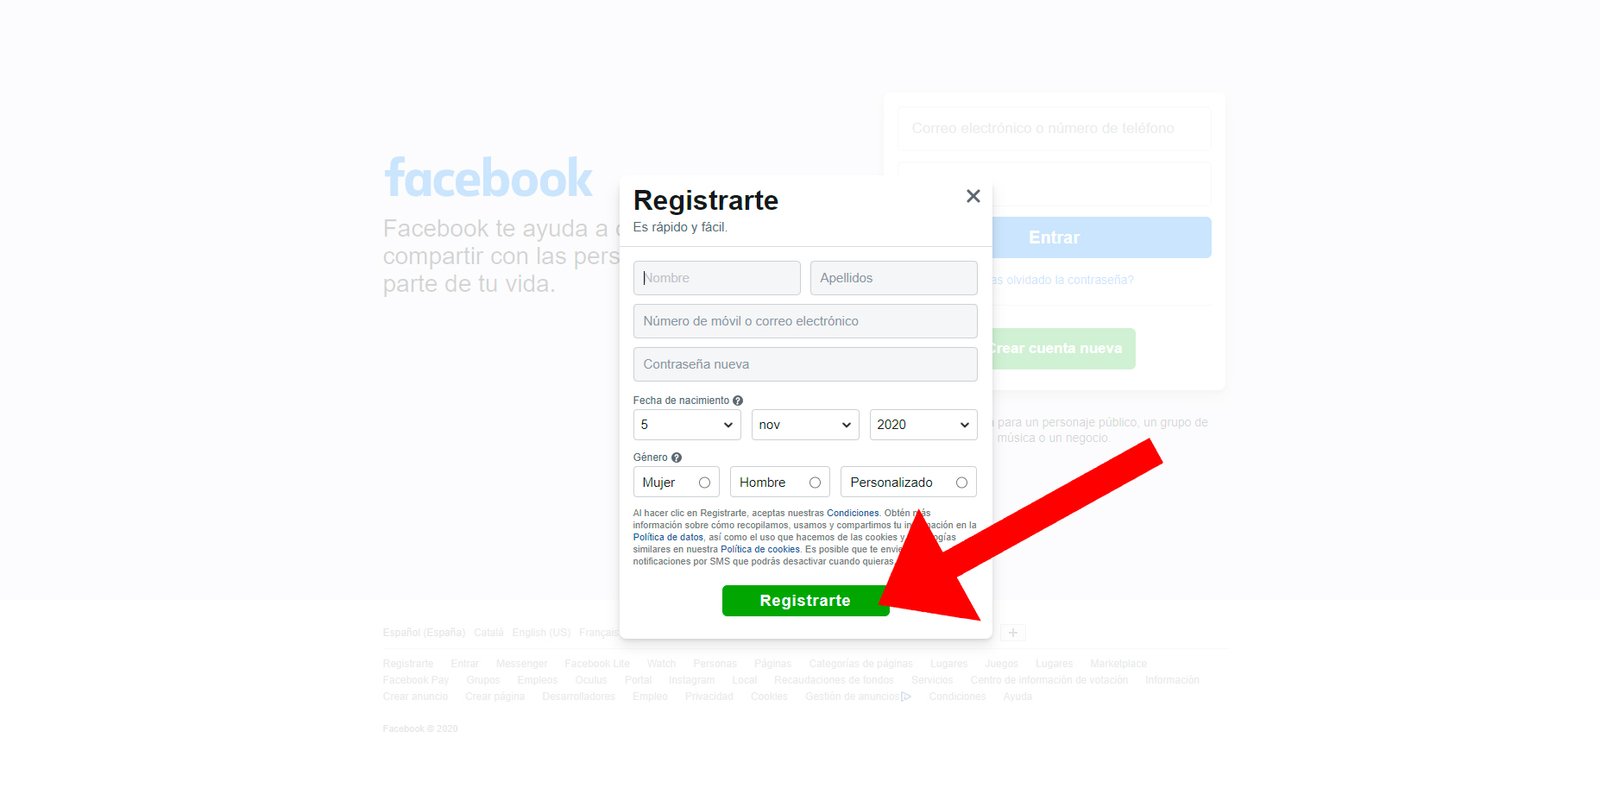 How to register on Facebook: create your account step by step